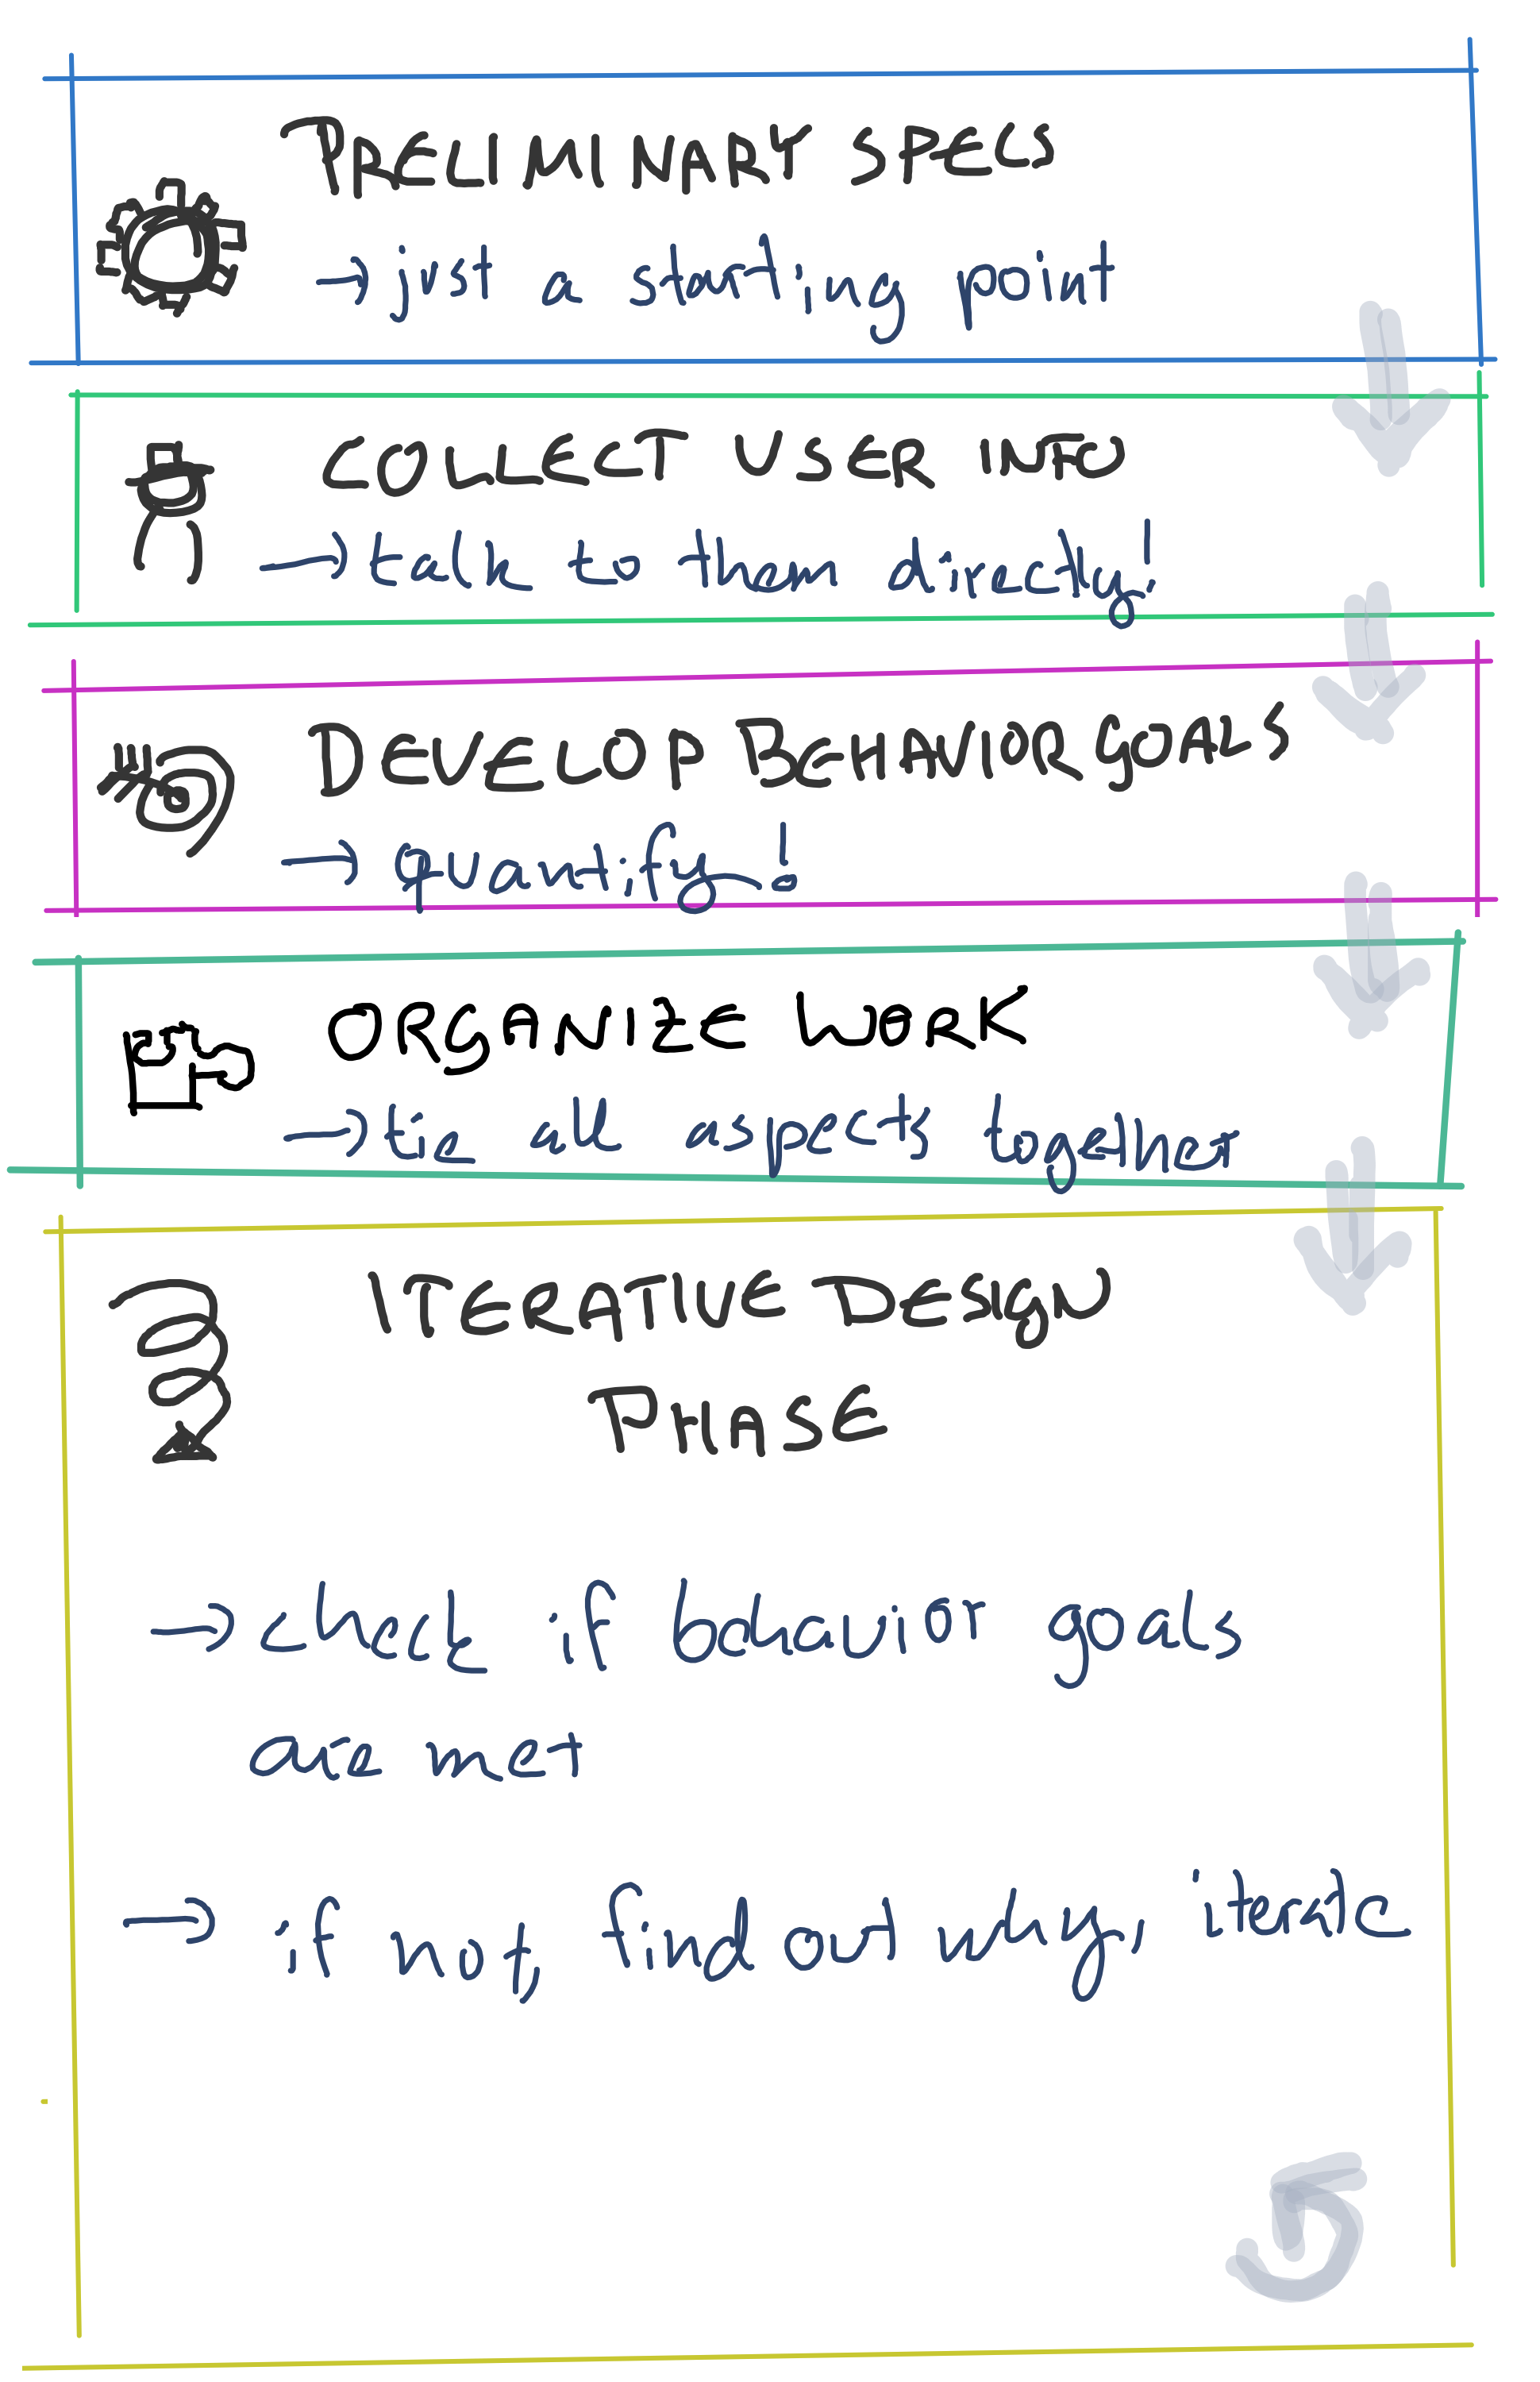 A diagram explaining the model: 5 boxes stacked on each other. Box 1: Preliminary Specs - just a starting point. Box 2: Collect User Info - talk to them directly. Box 3: Develop Behavior Goals - quantify! Box 4: Organize Work - tie all aspects together. Box 5: Iterative Design Phase - check if behavior goals are met, if not, find out why, iterate